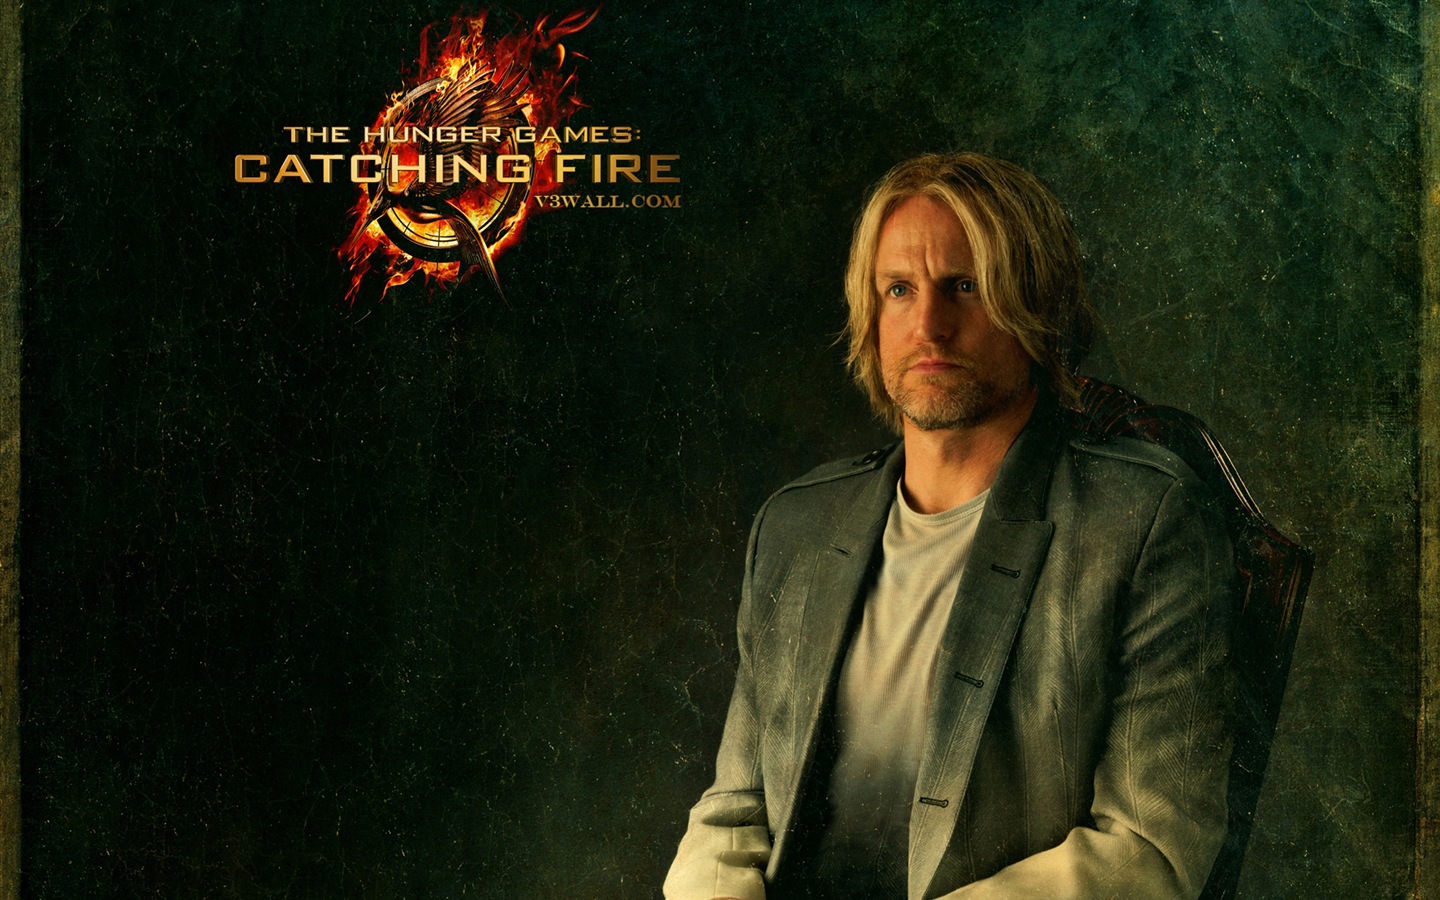 The Hunger Games: Catching Fire HD tapety #12 - 1440x900